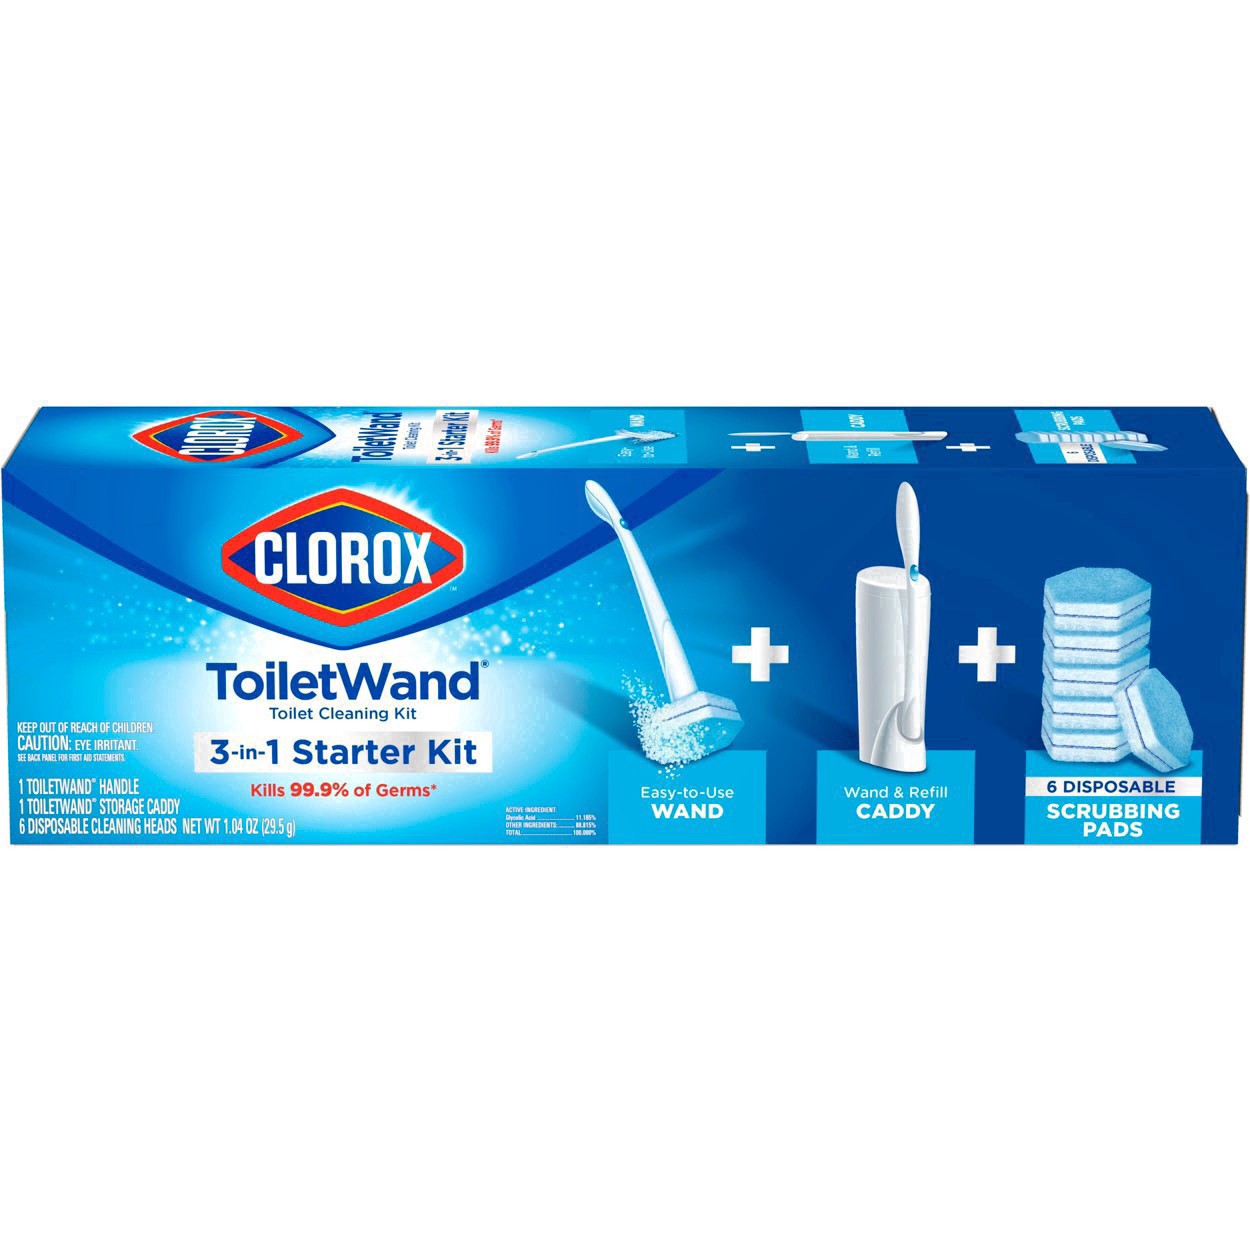 slide 77 of 176, Clorox Toilet Wand 3-in-1 Starter Toliet Cleaning Kit, 1 ct